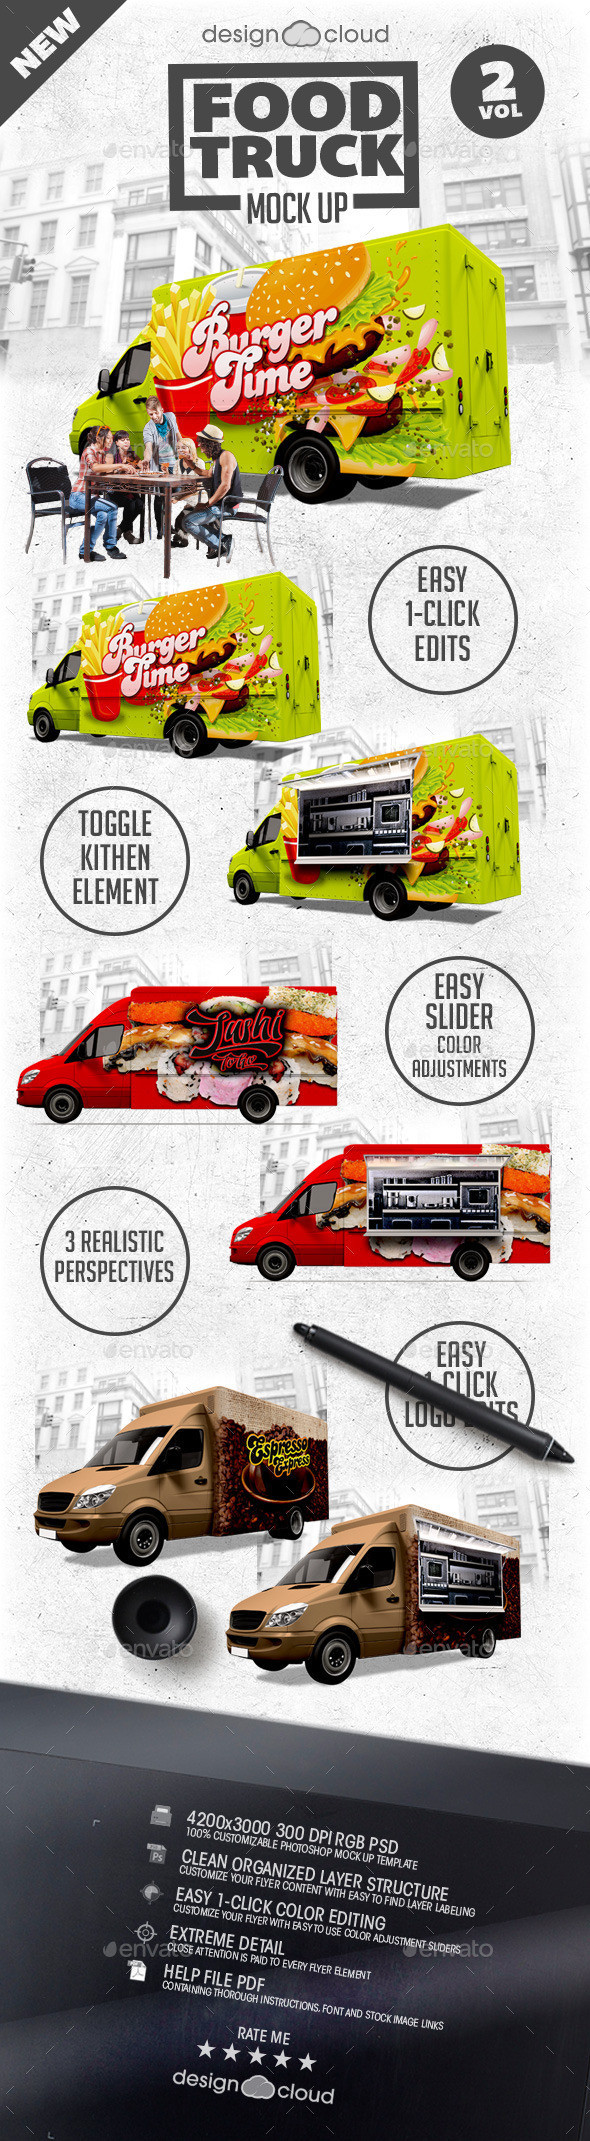 Preview food truck mock up kit vol 02